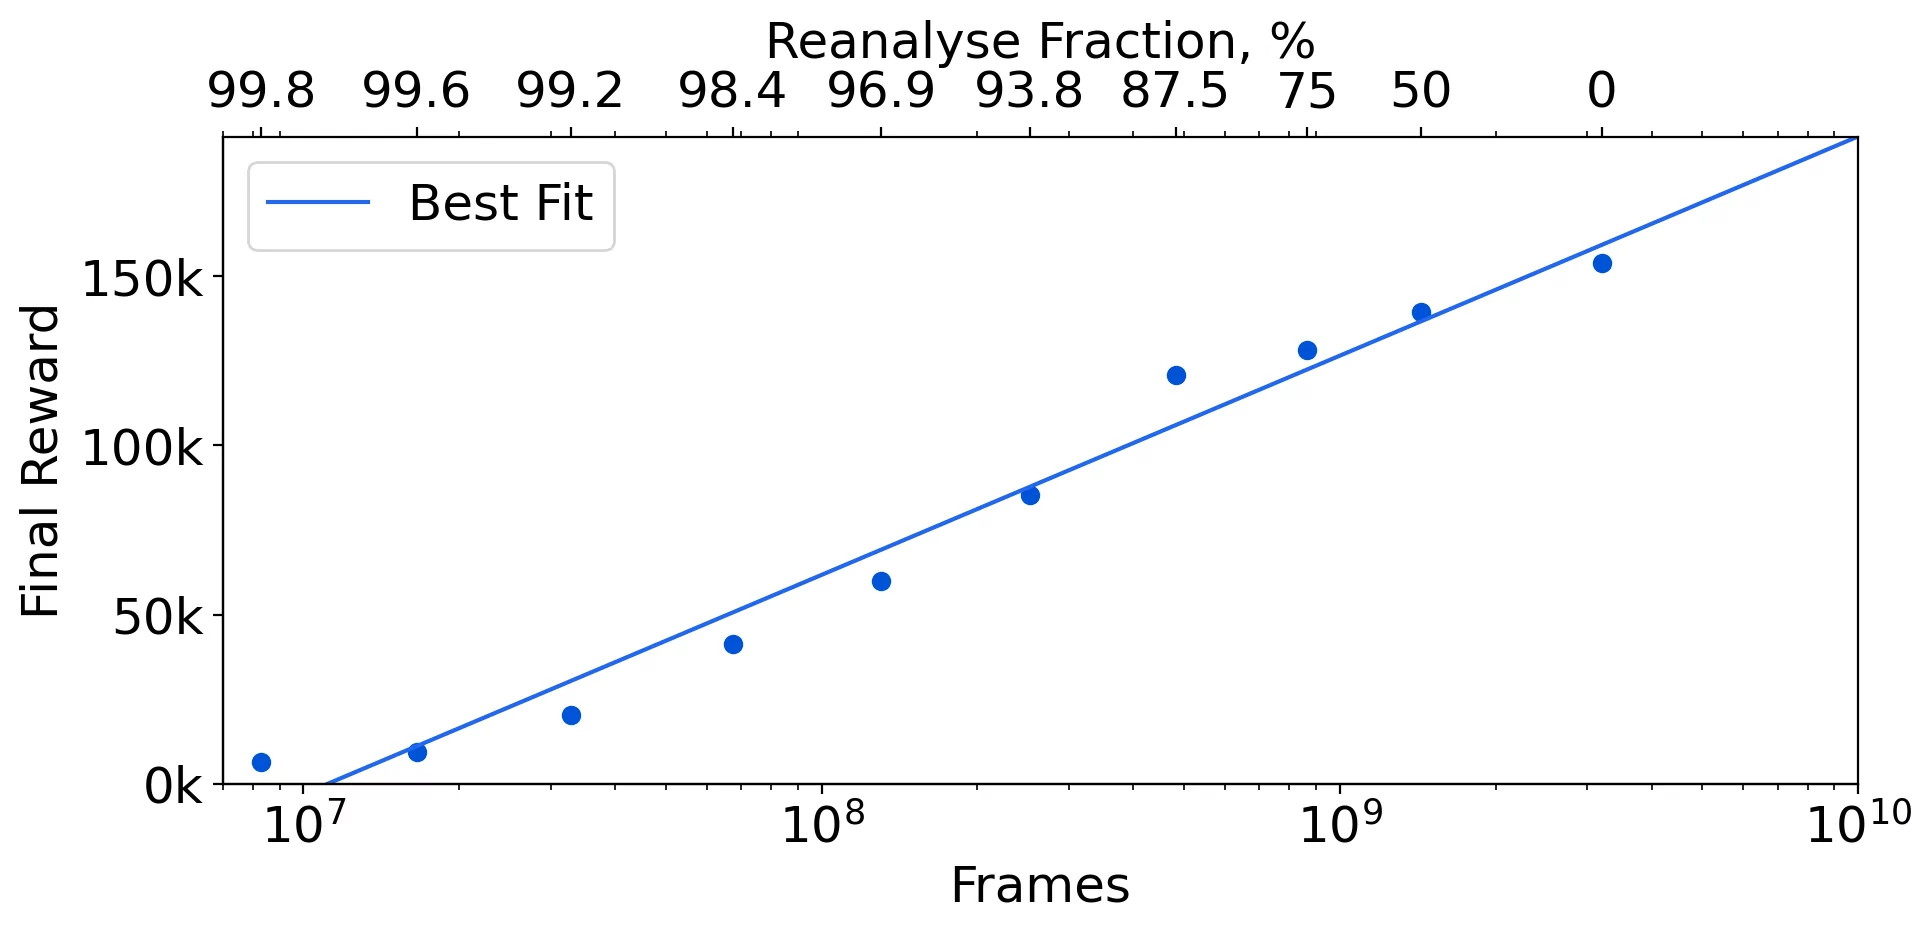 Score in Pacman vs Number of frames, showing log-linear improvement